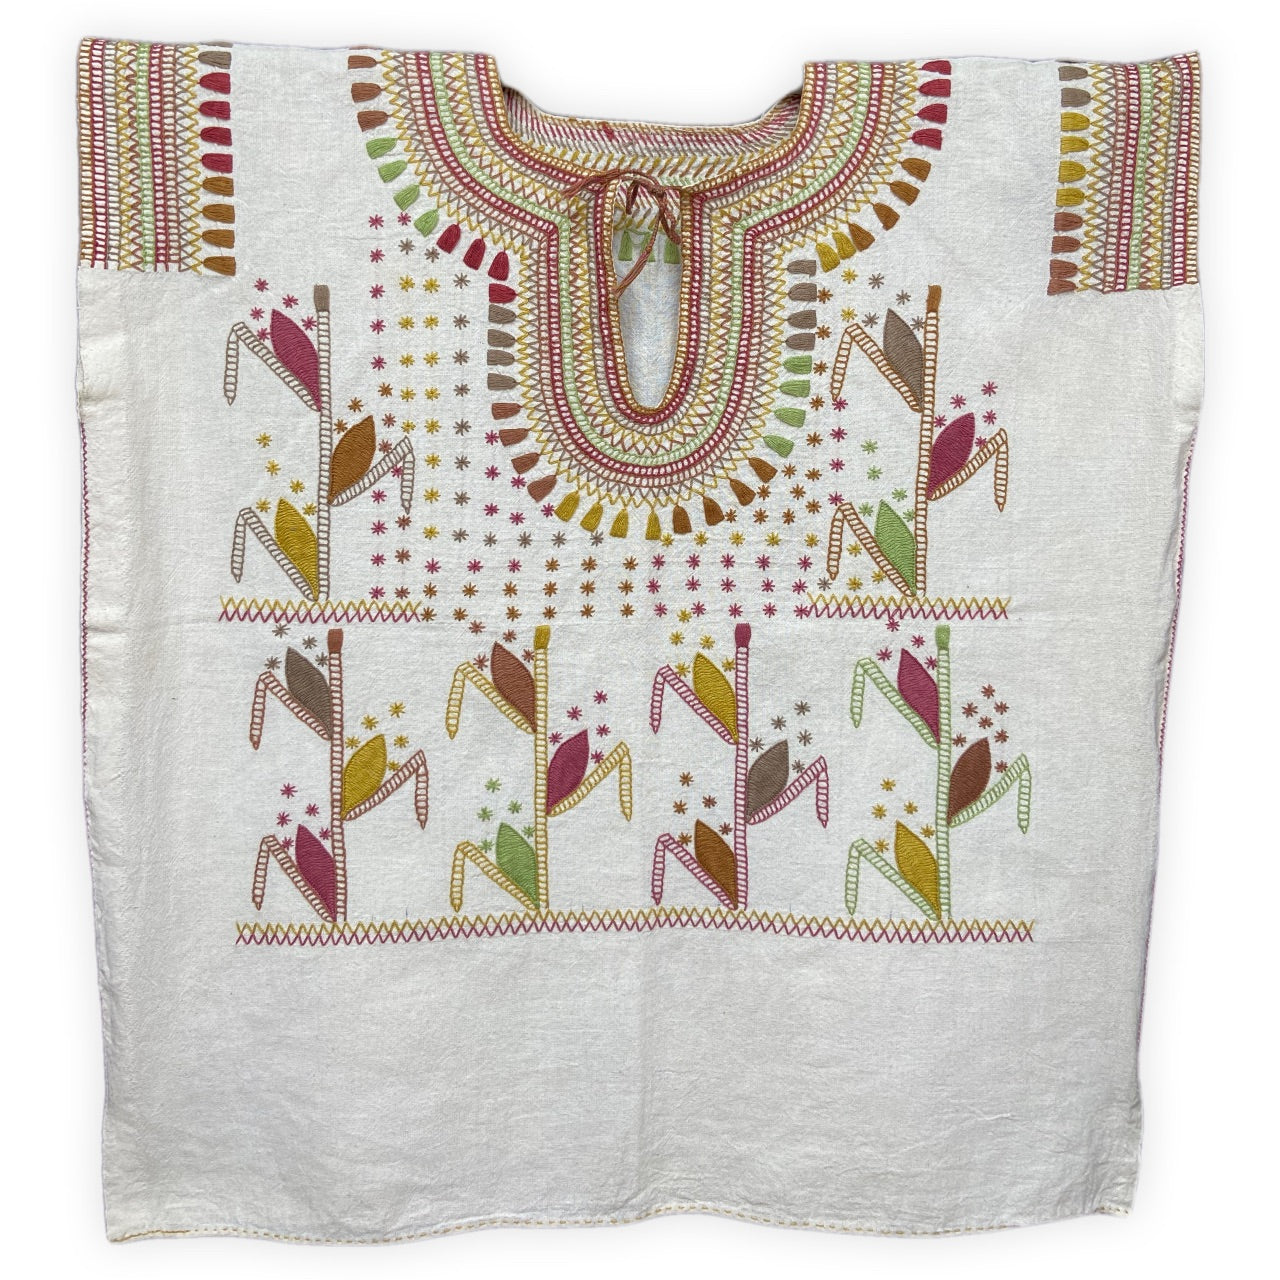 Hand embroidered huipil blouse in neutral hues